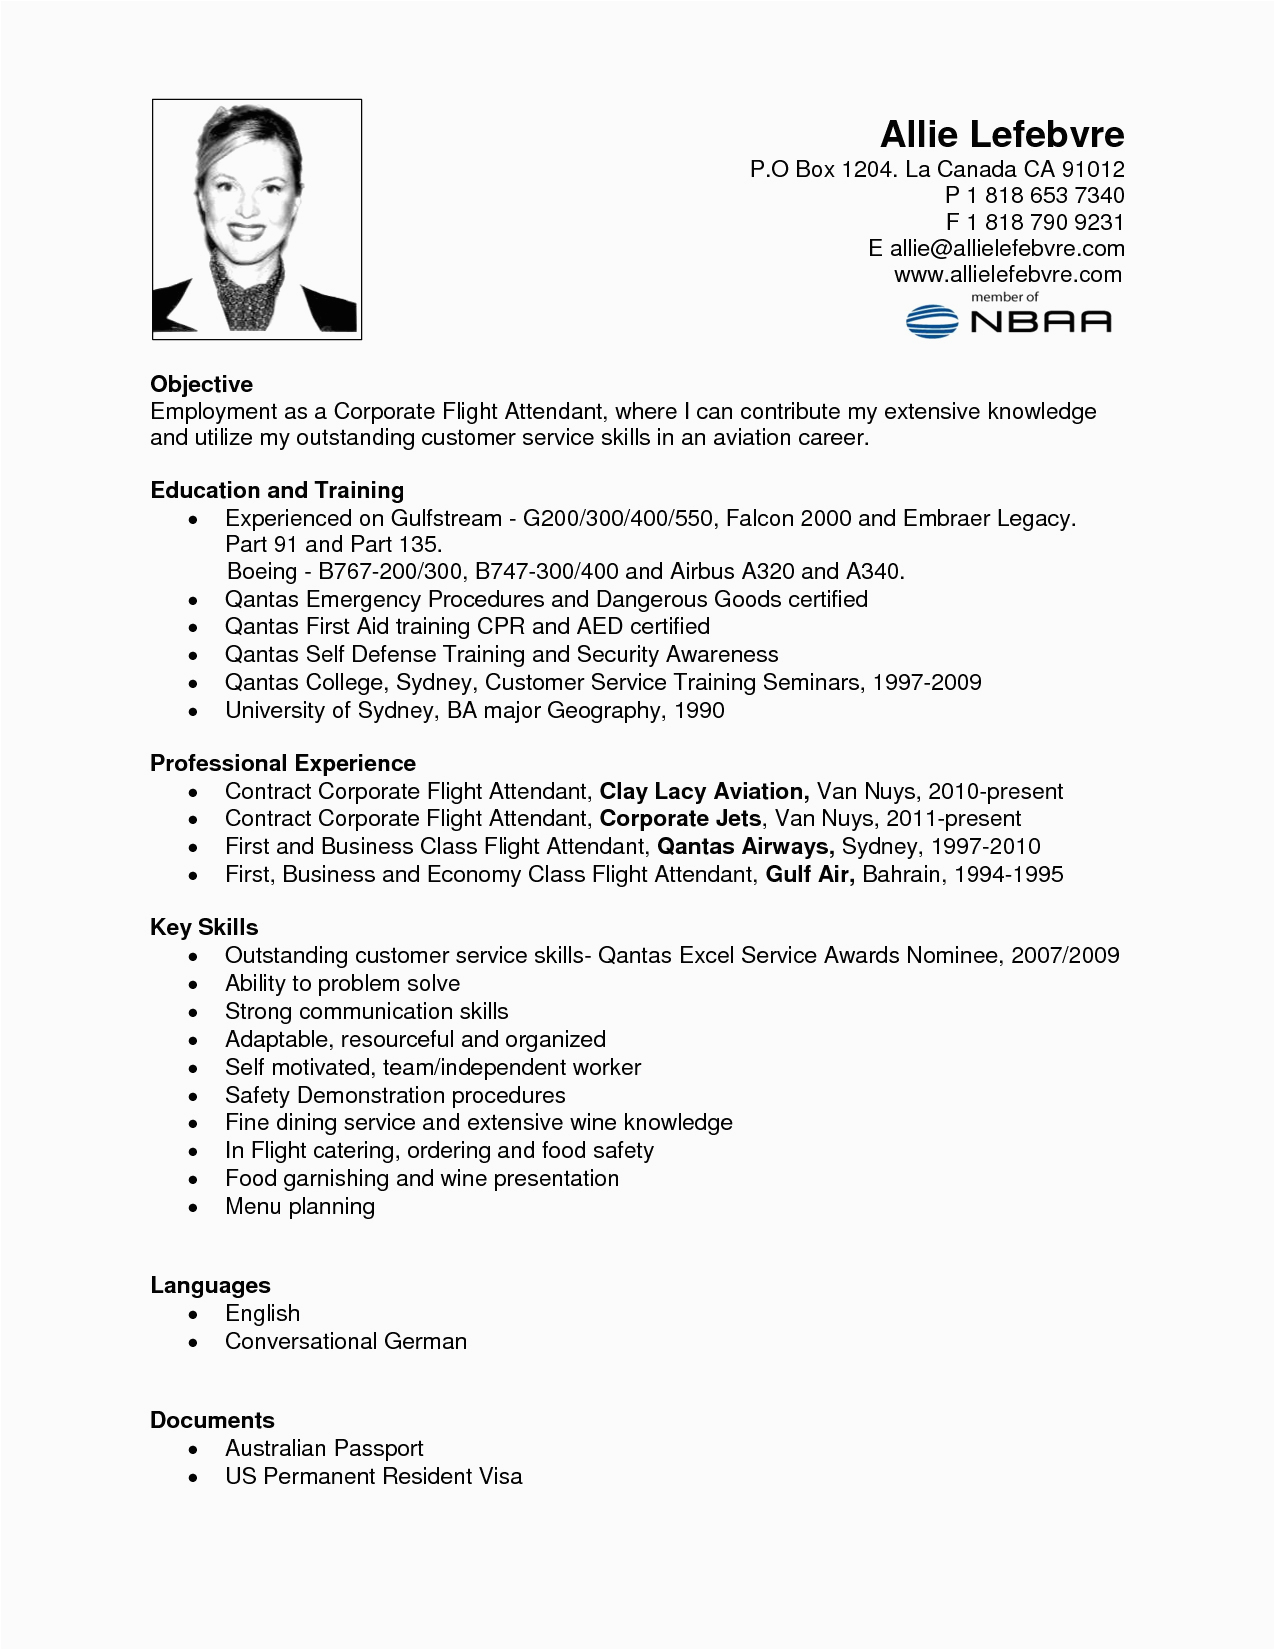 Sample Resume for Flight attendant with No Experience Pdf Flight attendant Resume Sample